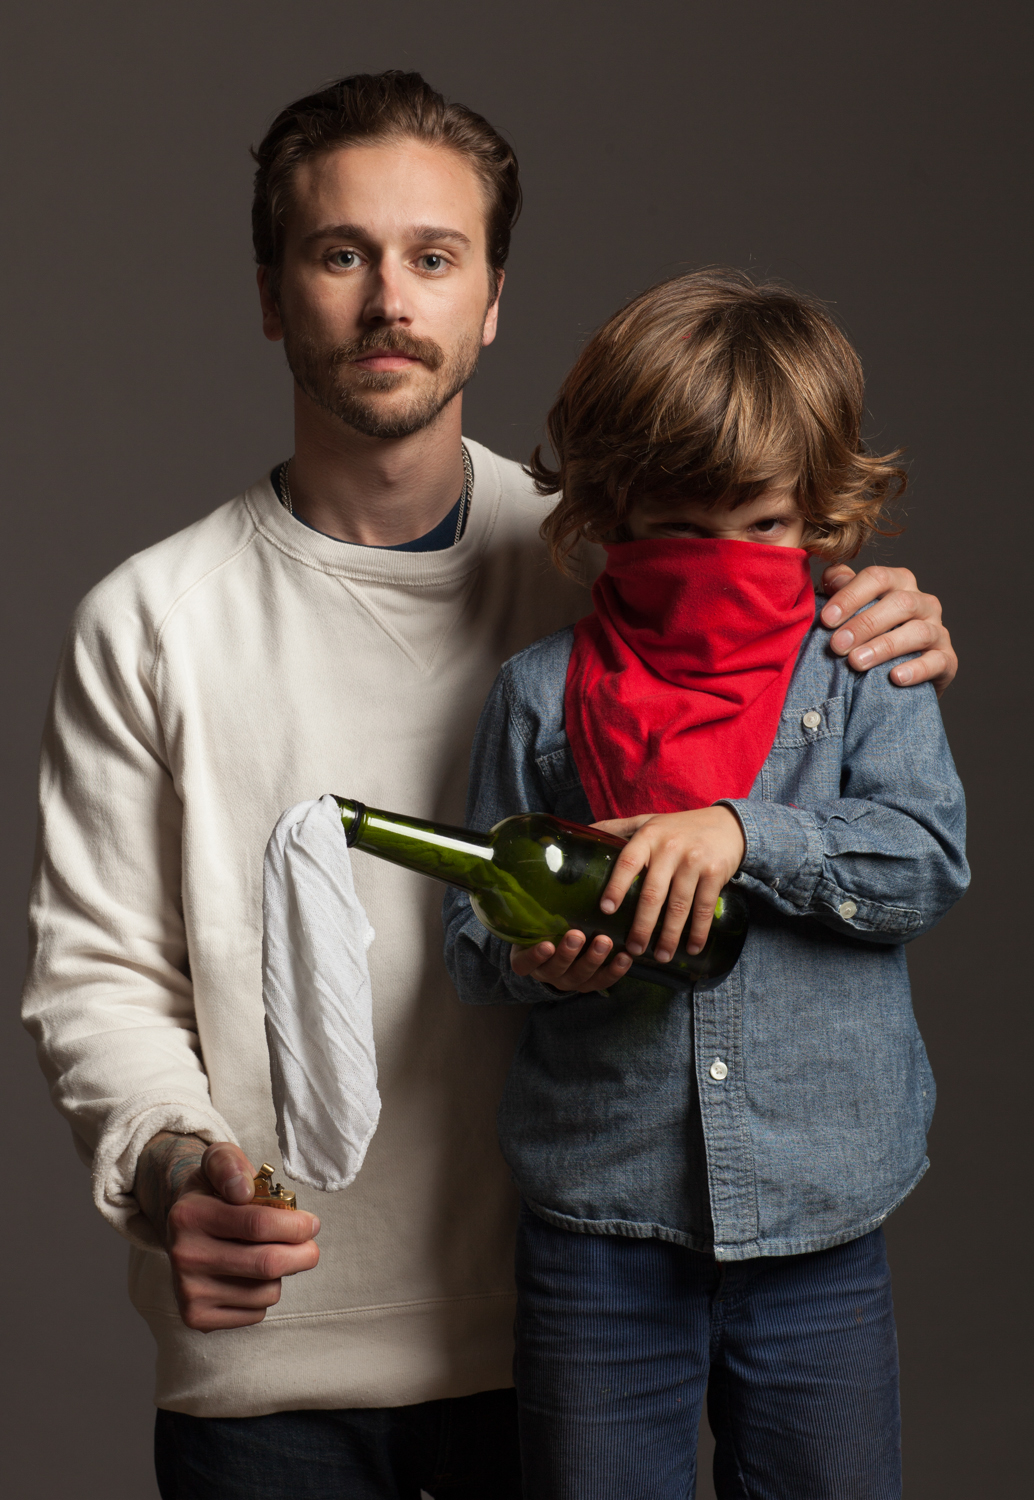 John Gourley of Portugal. The Man